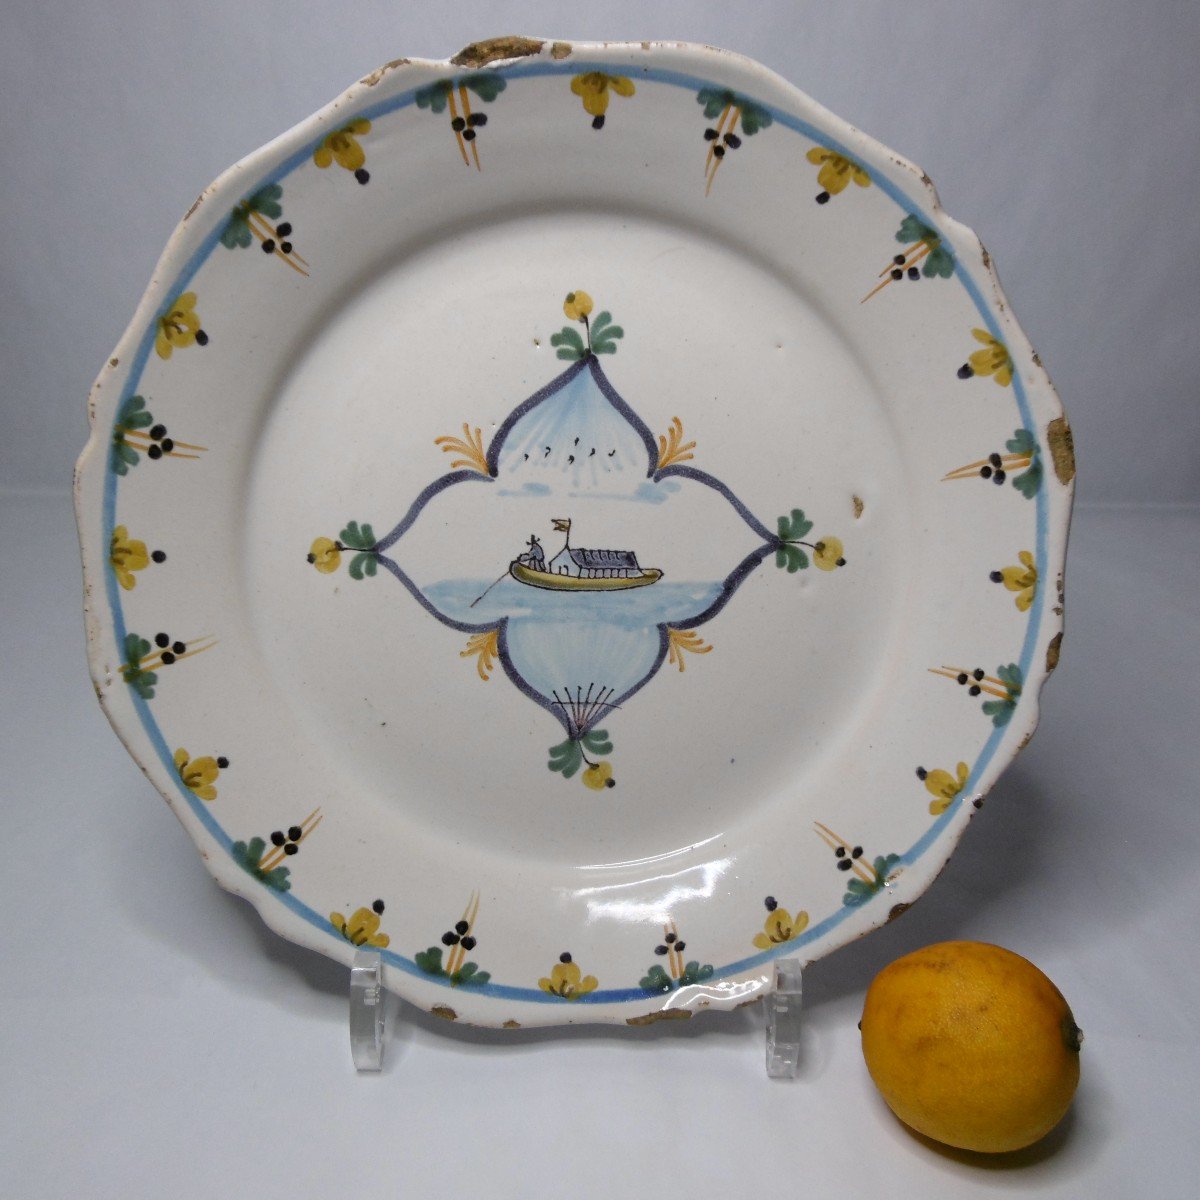 Boat Plate In Nevers Faience Eighteenth Century